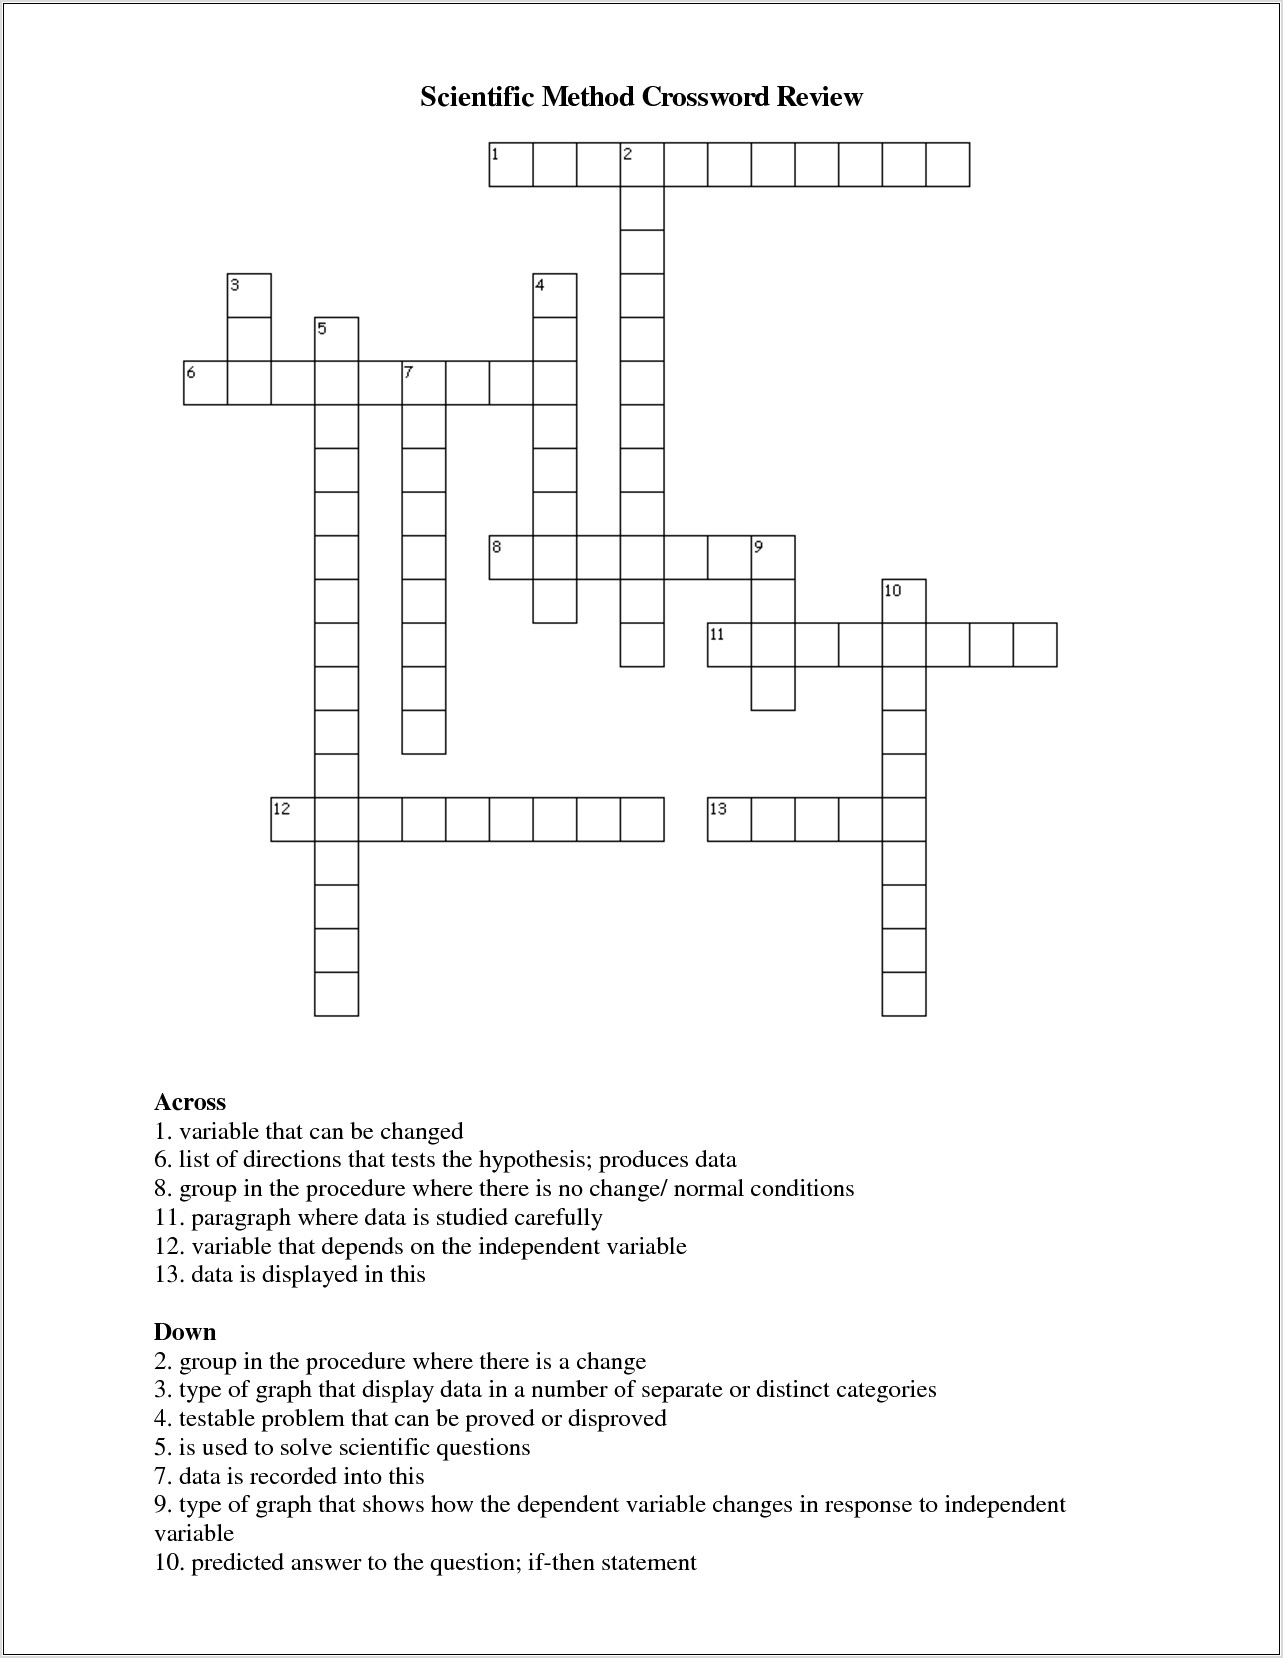 Scientific Method Review Worksheet Crossword Puzzle Answers